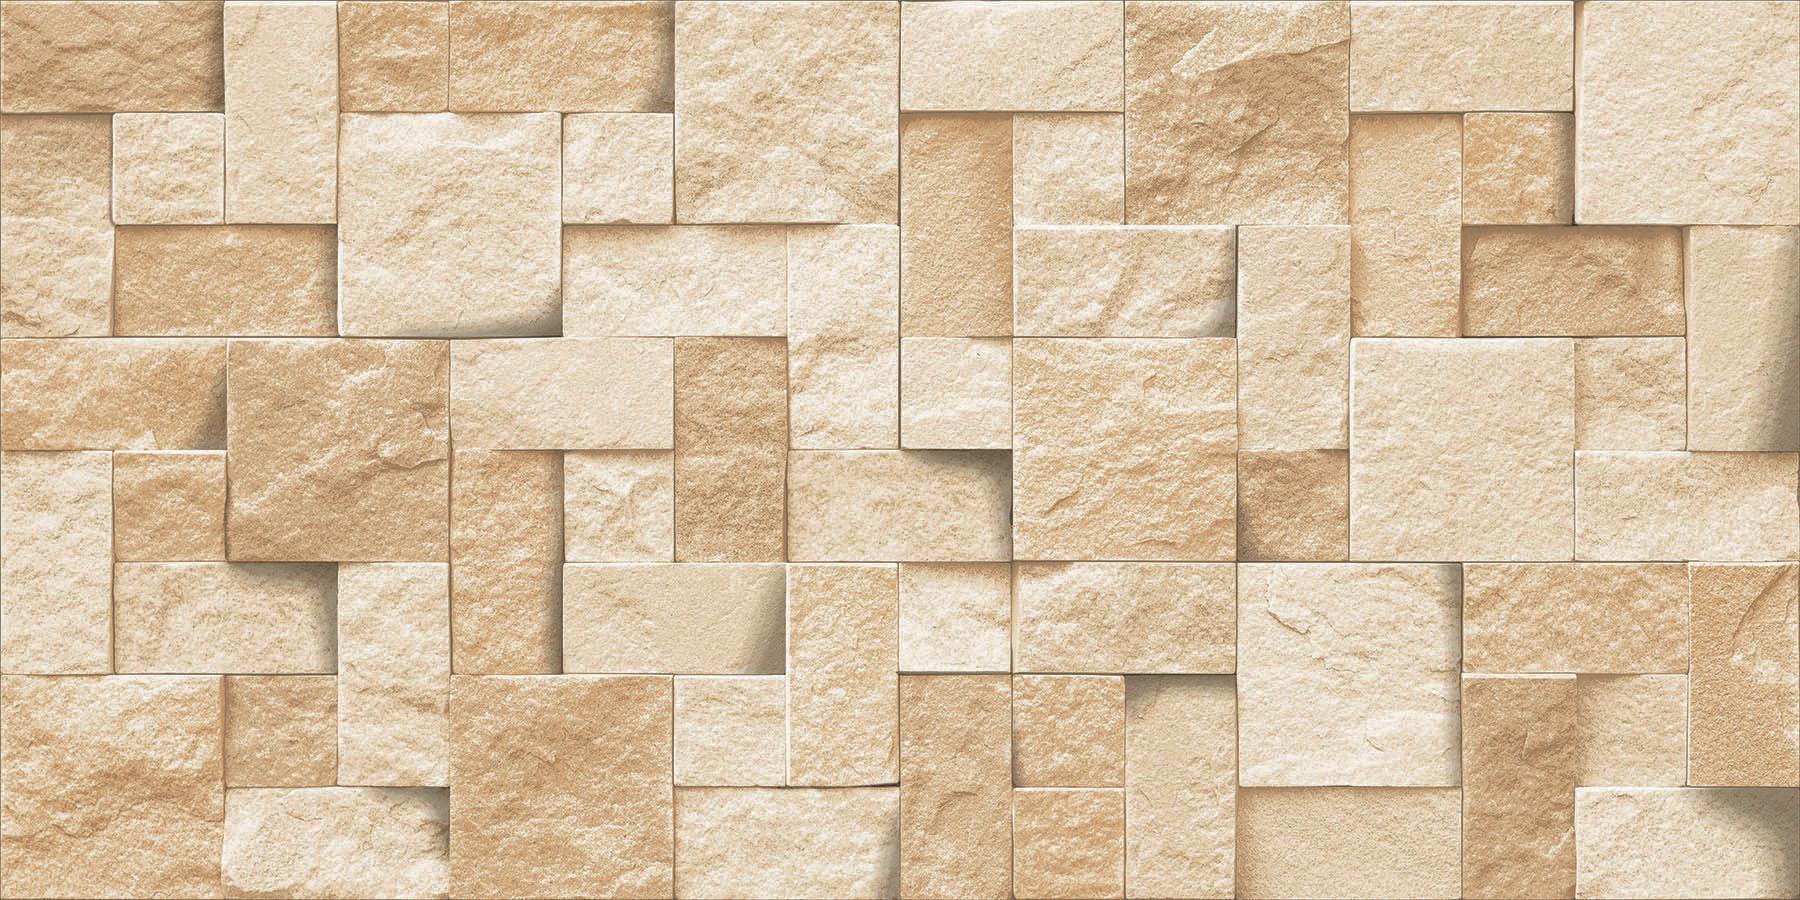 Elevation Tiles for Bathroom Tiles, Living Room Tiles, Elevation Tiles, Accent Tiles, Hospital Tiles, Commercial/Office, Outdoor Area, School & Collages